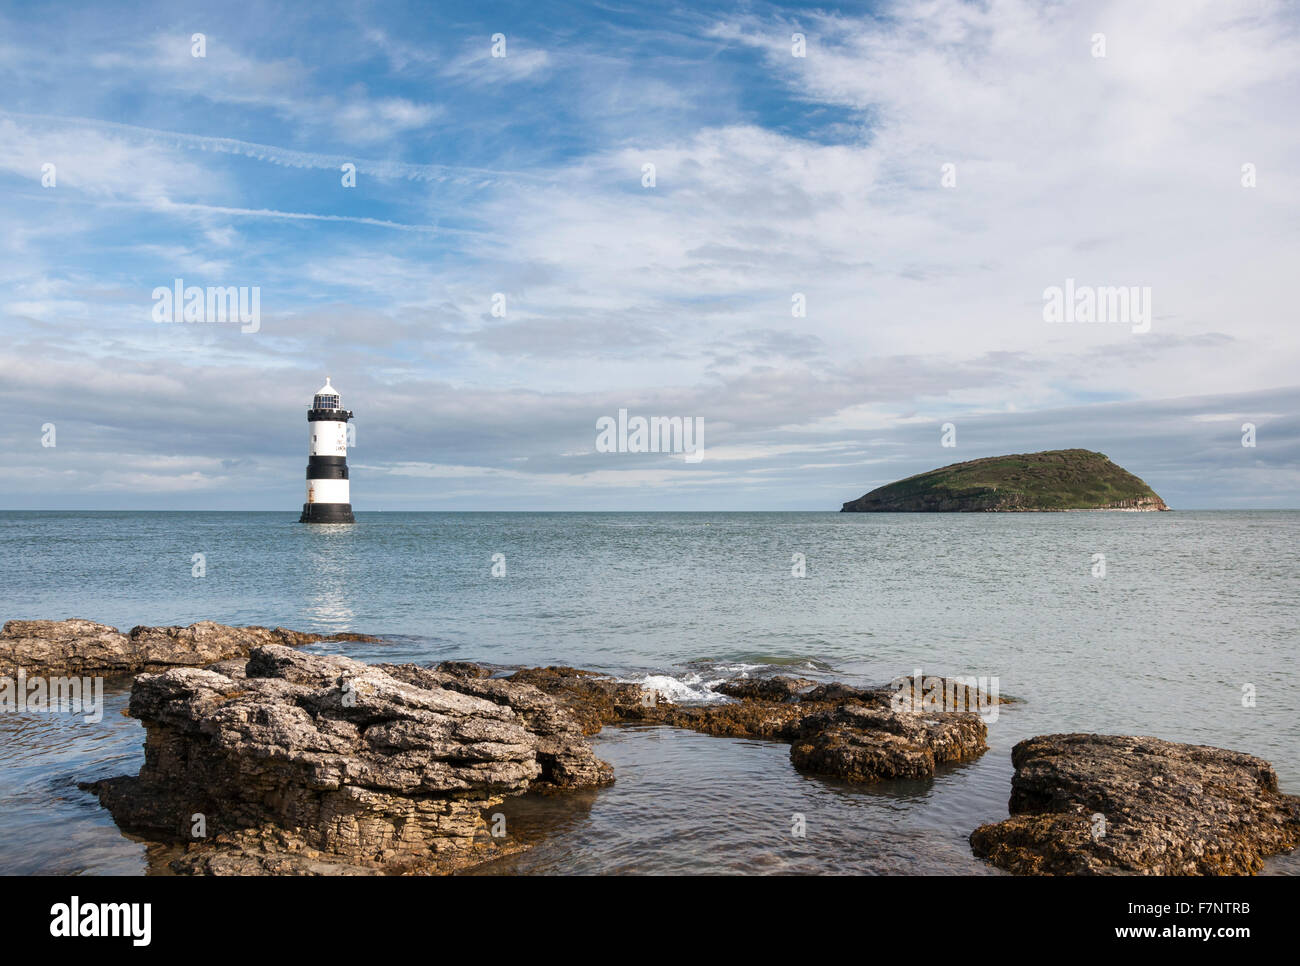 Penmon lighthouse and Puffin rock on the coast of Anglesey, North Wales. Stock Photo